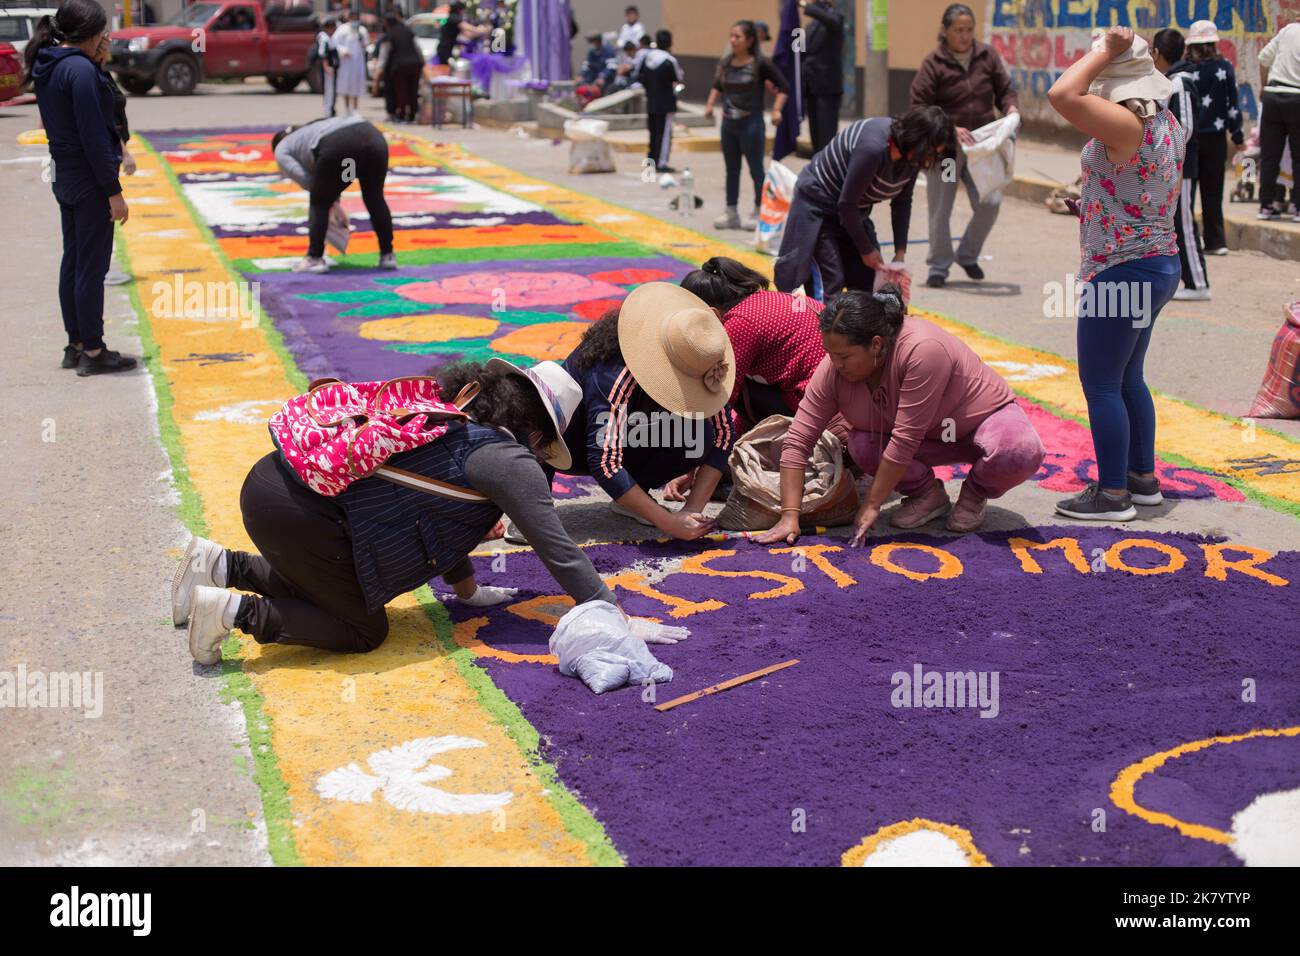 People assembling carpets for the procession of the 'Señor de los Milagros'. Concept of religious traditions in Peru. Stock Photo